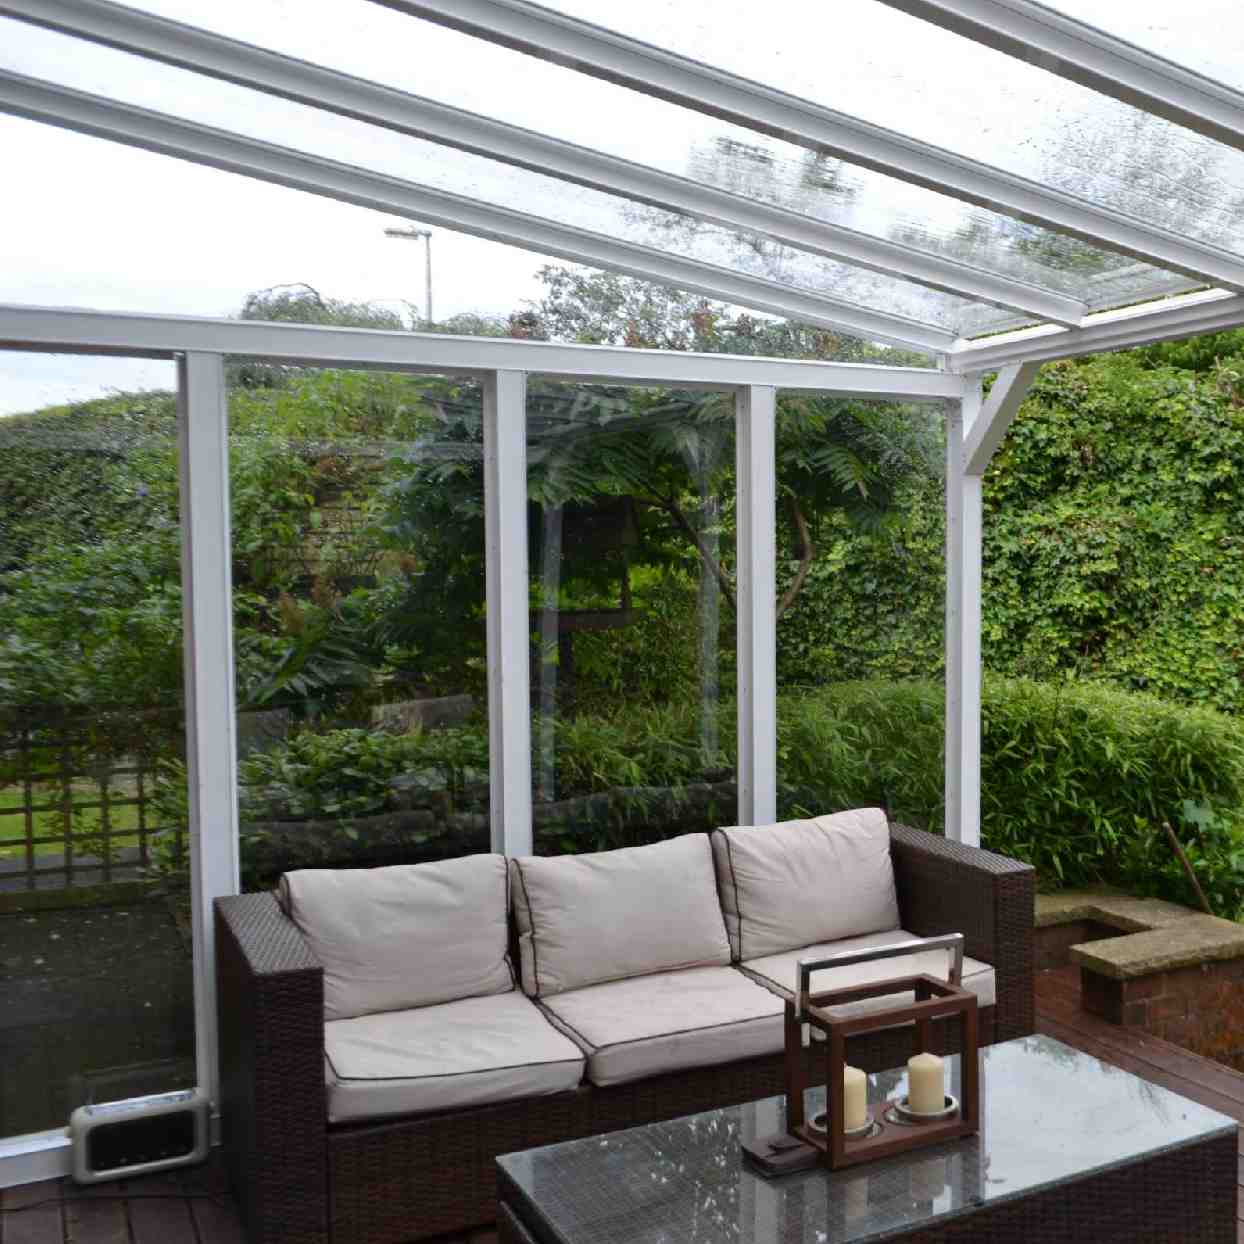 Buy Omega Verandah White with 6mm Glass Clear Plate Polycarbonate Glazing - 6.3m (W) x 1.5m (P), (4) Supporting Posts online today